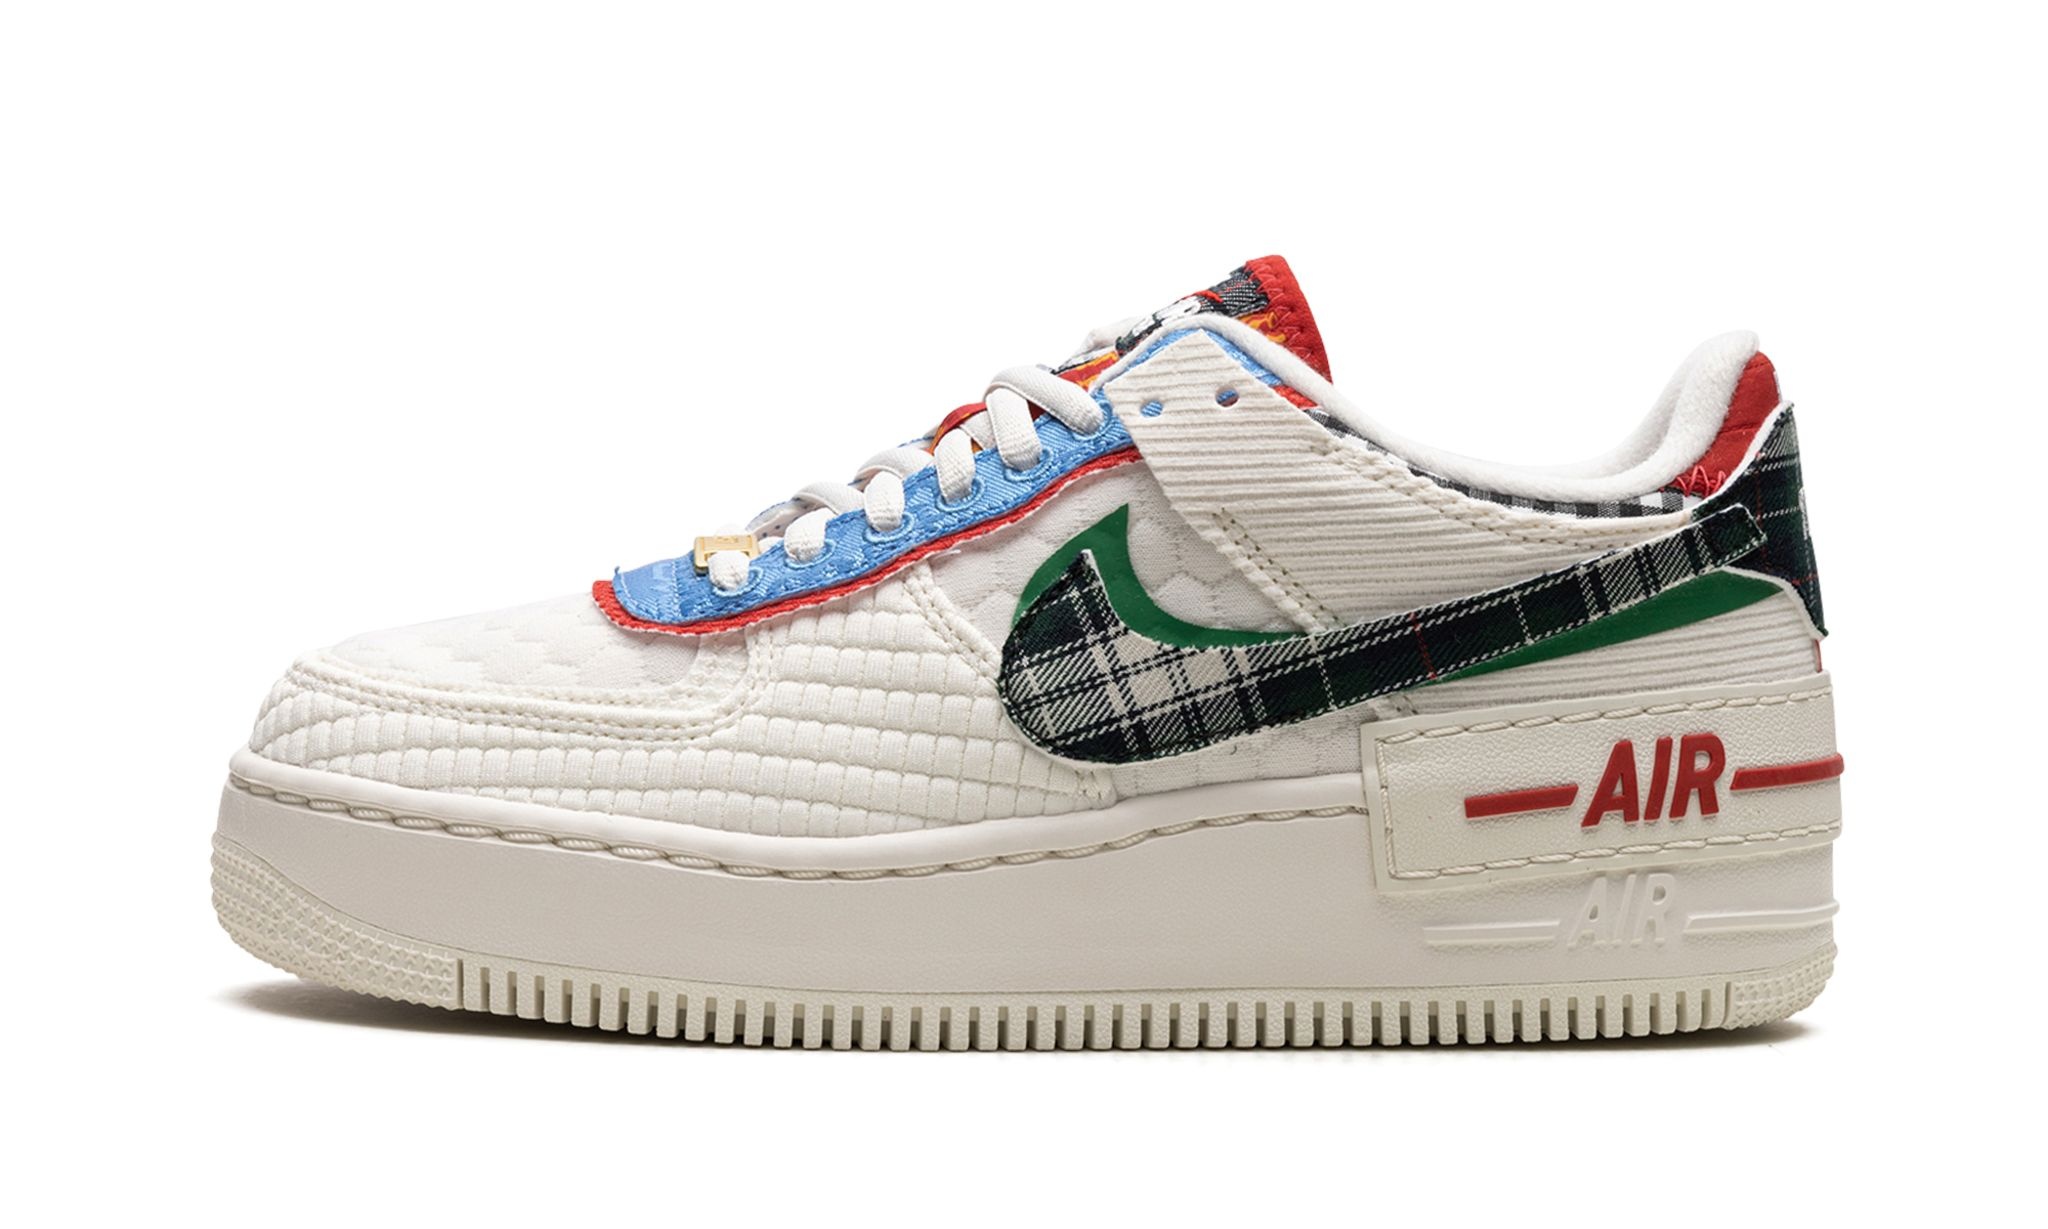 Nike Air Force 1 Shadow WMNS "Multi-Material" - 1